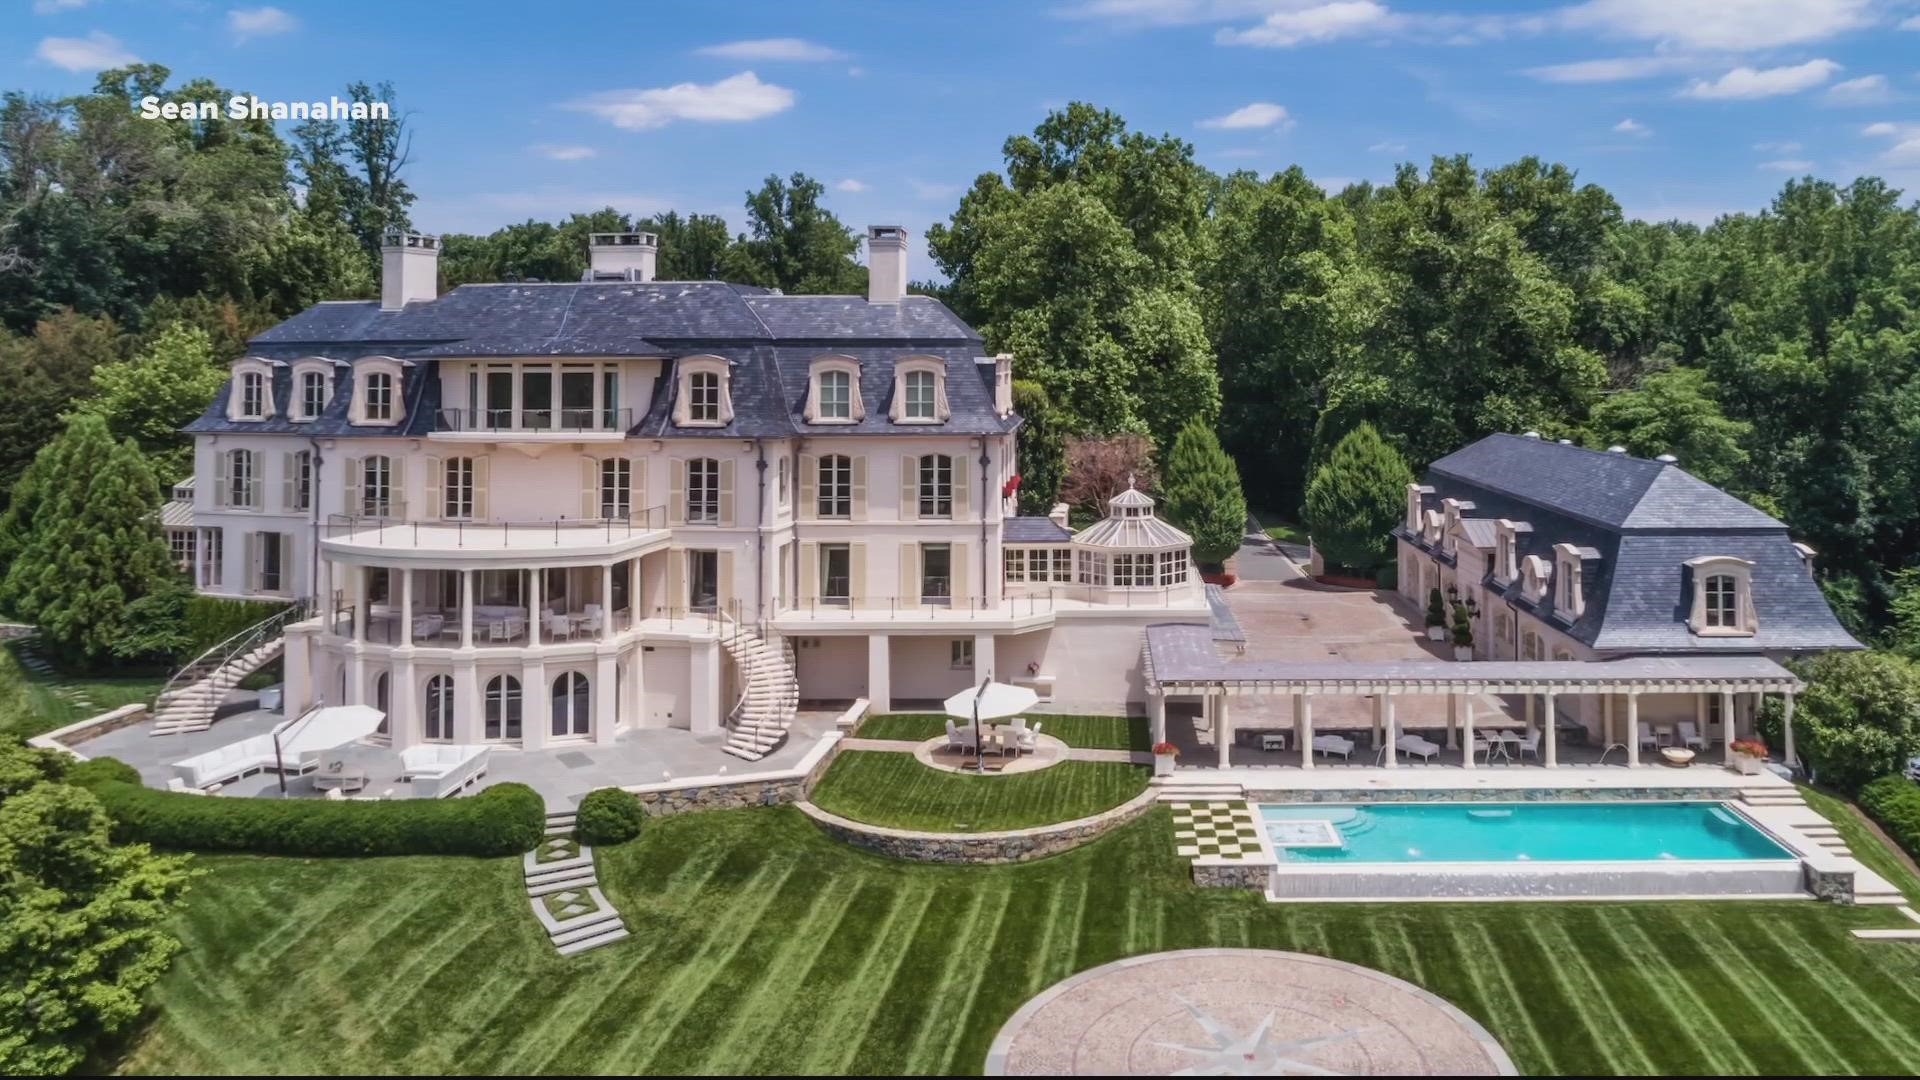 Washington Commanders owner Dan Snyder has officially put his Potomac estate up for sale Monday.